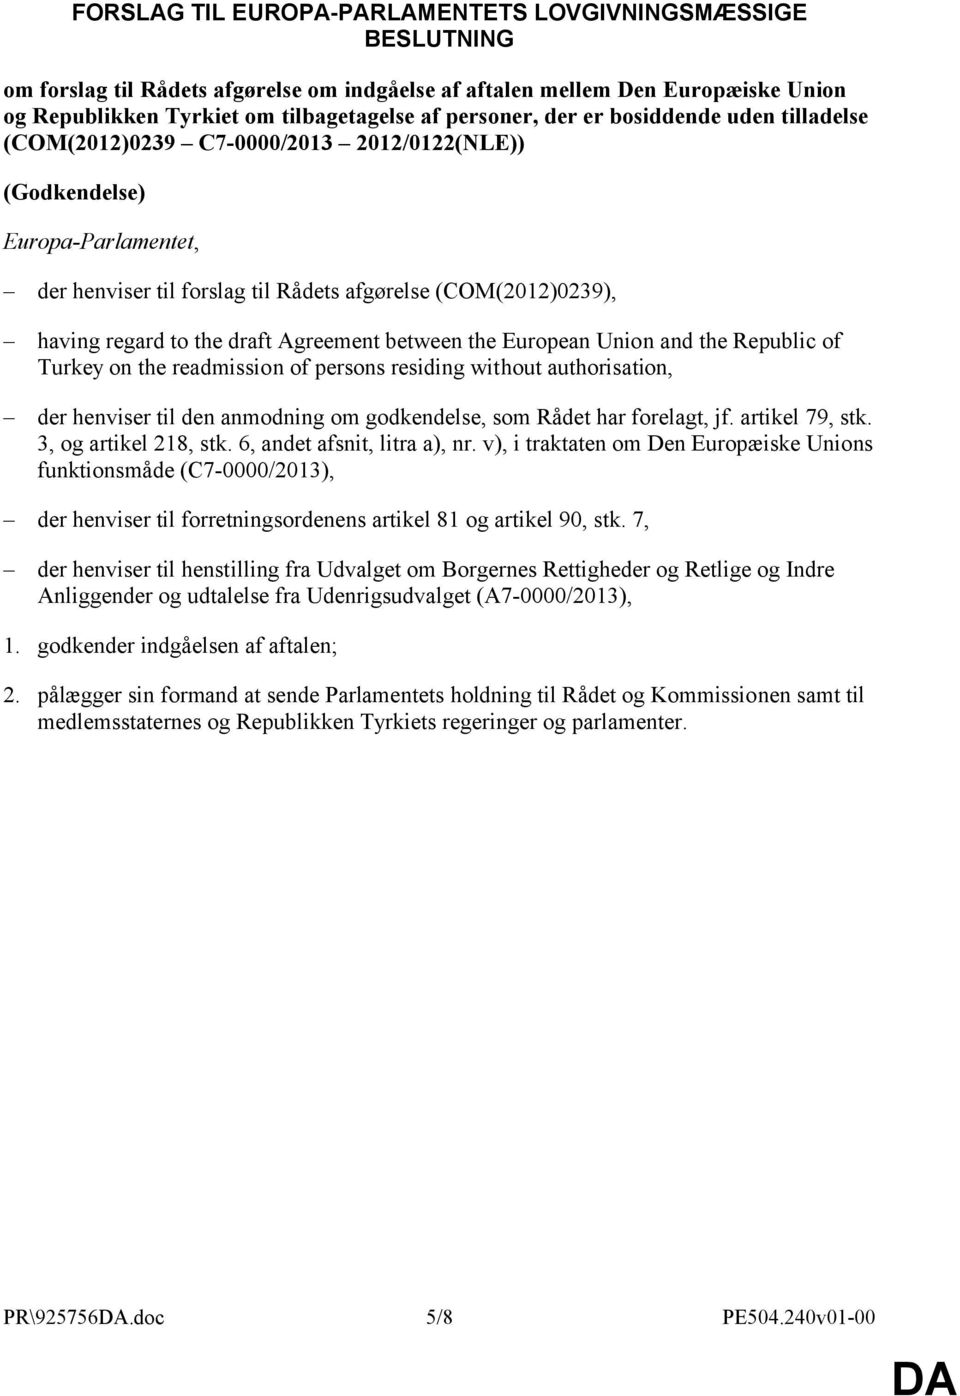 draft Agreement between the European Union and the Republic of Turkey on the readmission of persons residing without authorisation, der henviser til den anmodning om godkendelse, som Rådet har